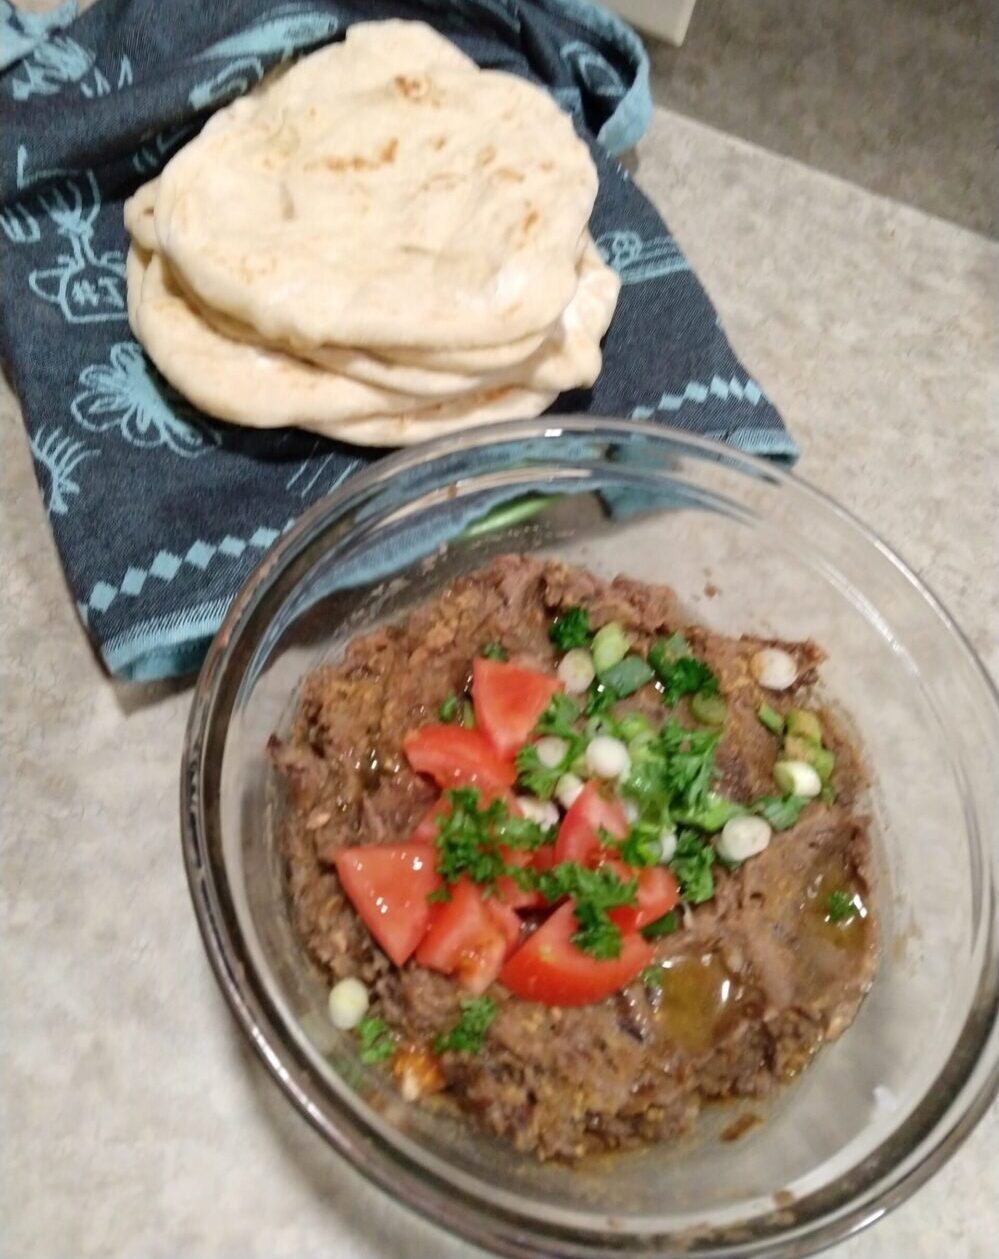 a slightly blurry photo of a bowl of bean dip topped with tomatoes, green onion, and parsley next to a stack of pita bread